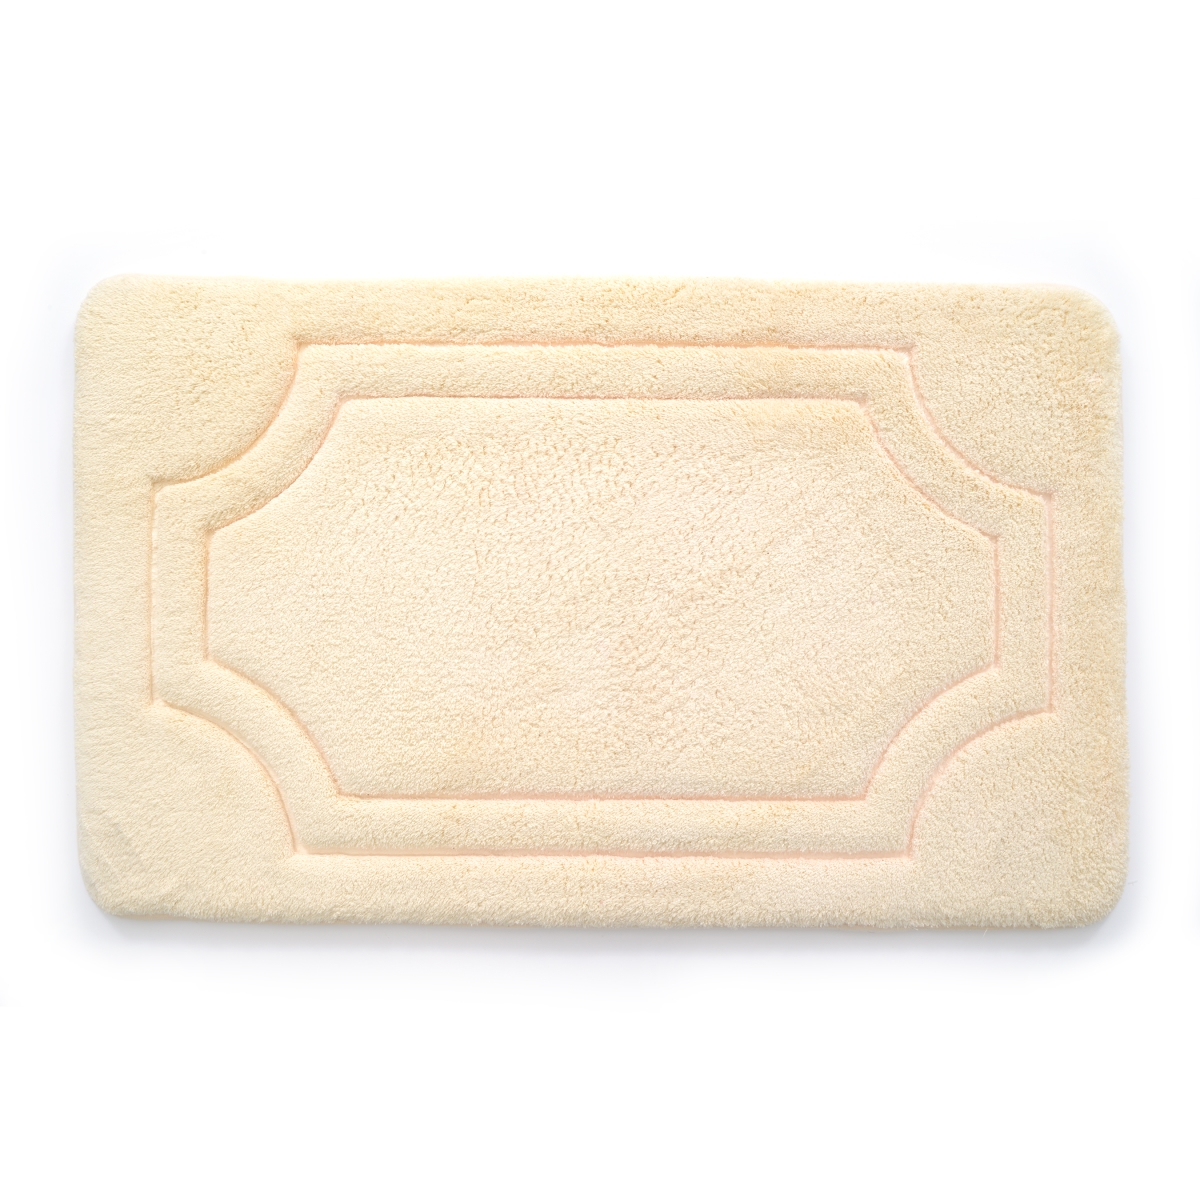 21 X 34 In. Luxurious Memory Foam Bath Mat With Water Shield Technology - Antique White